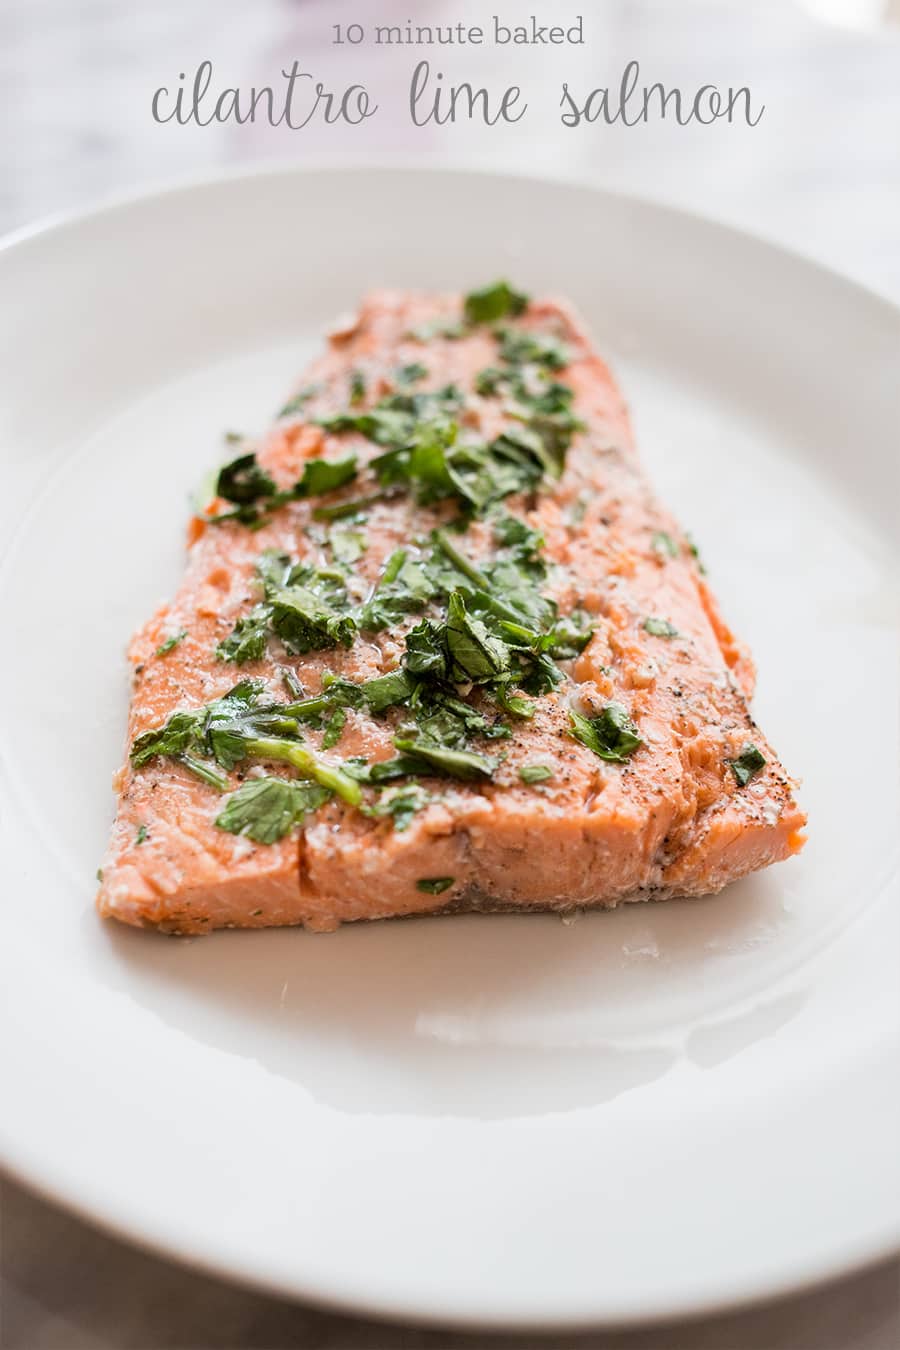 This delicious cilantro lime salmon cooks in just 10 minutes and is so flavorful!